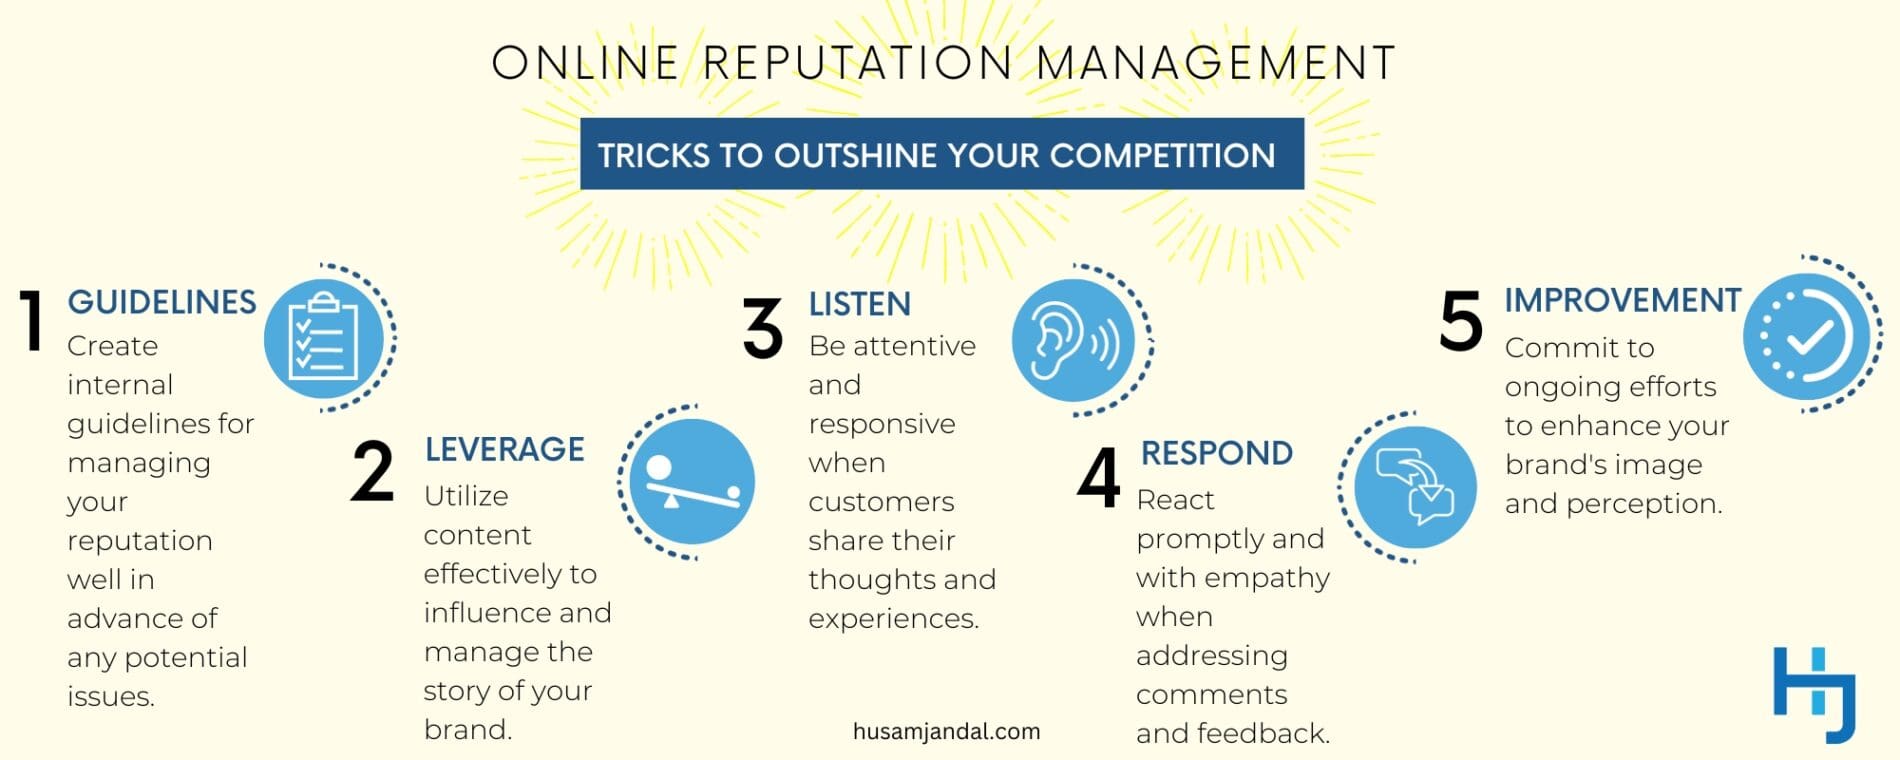 5 Online Reputation Management Tricks to Outshine Your Competitors